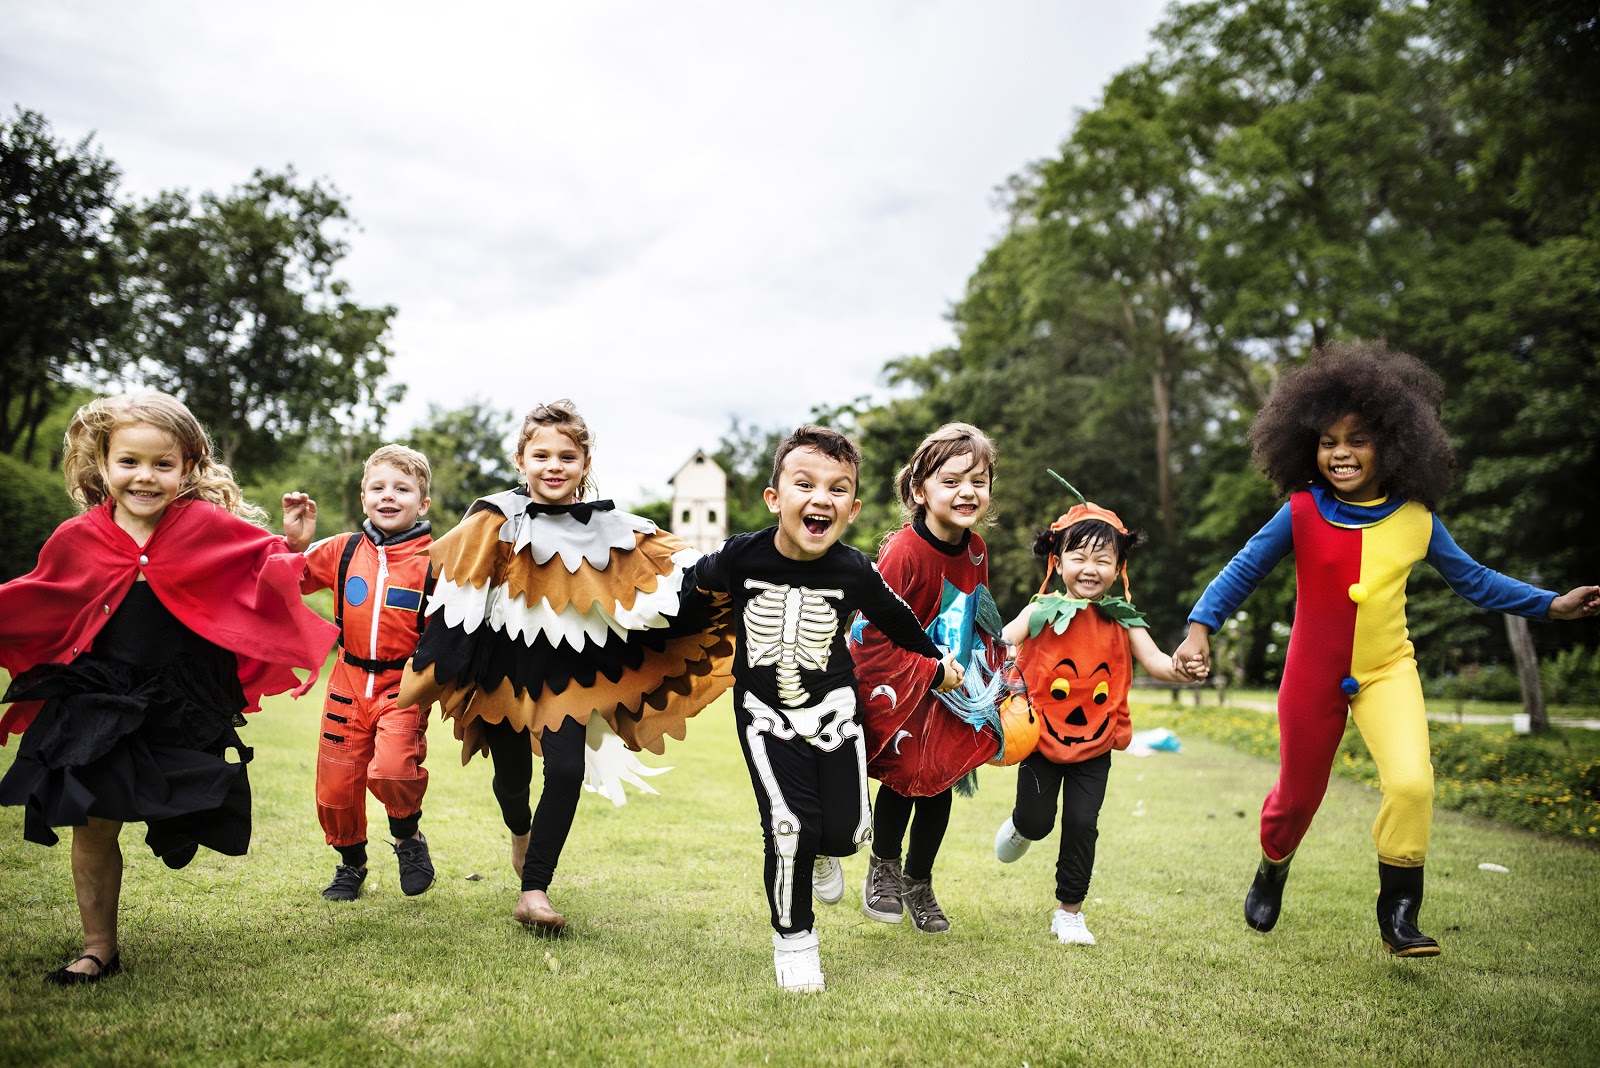 Kids play outside in their Halloween costumes